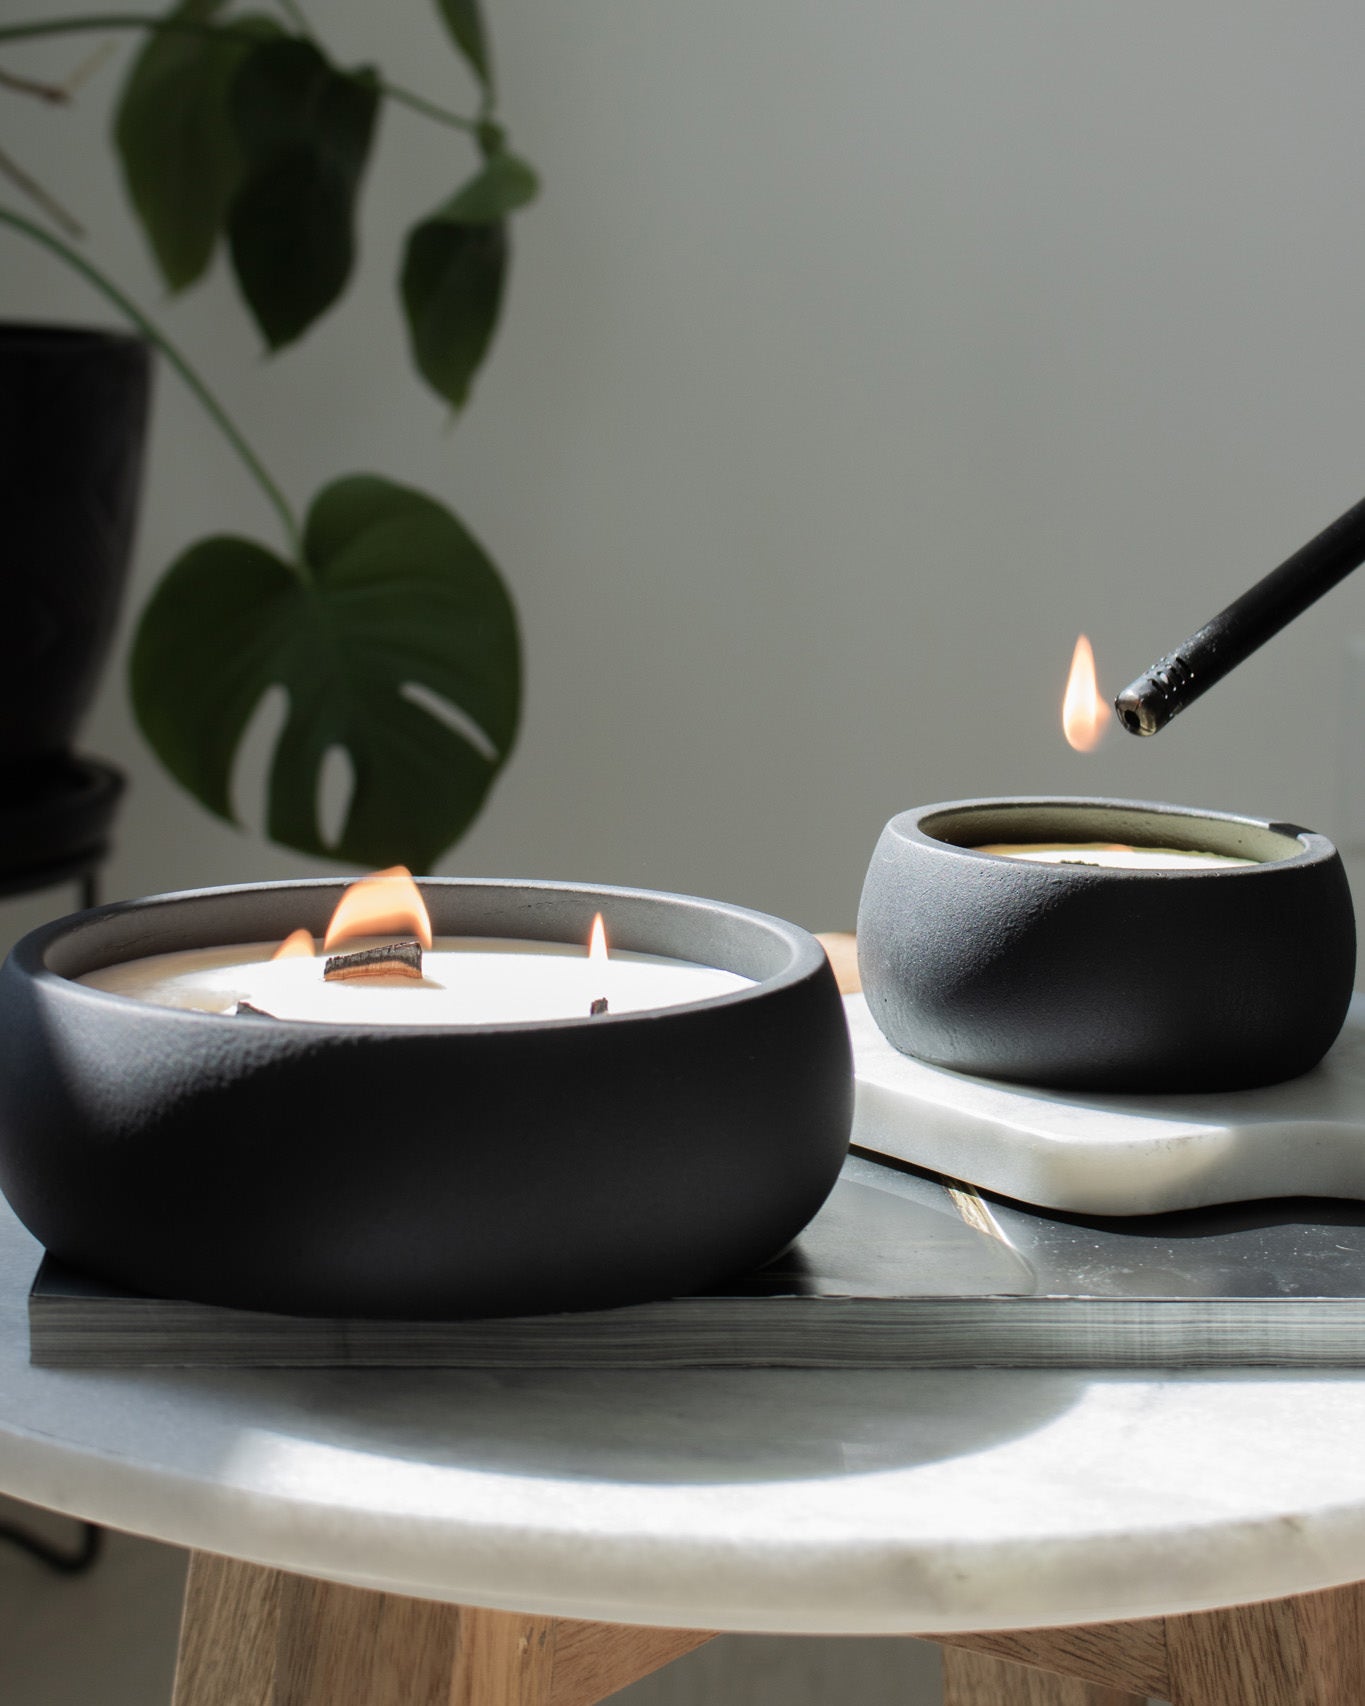 Take A Hike Coconut Soy Candle - Black Concrete Wooden Wick Vessel